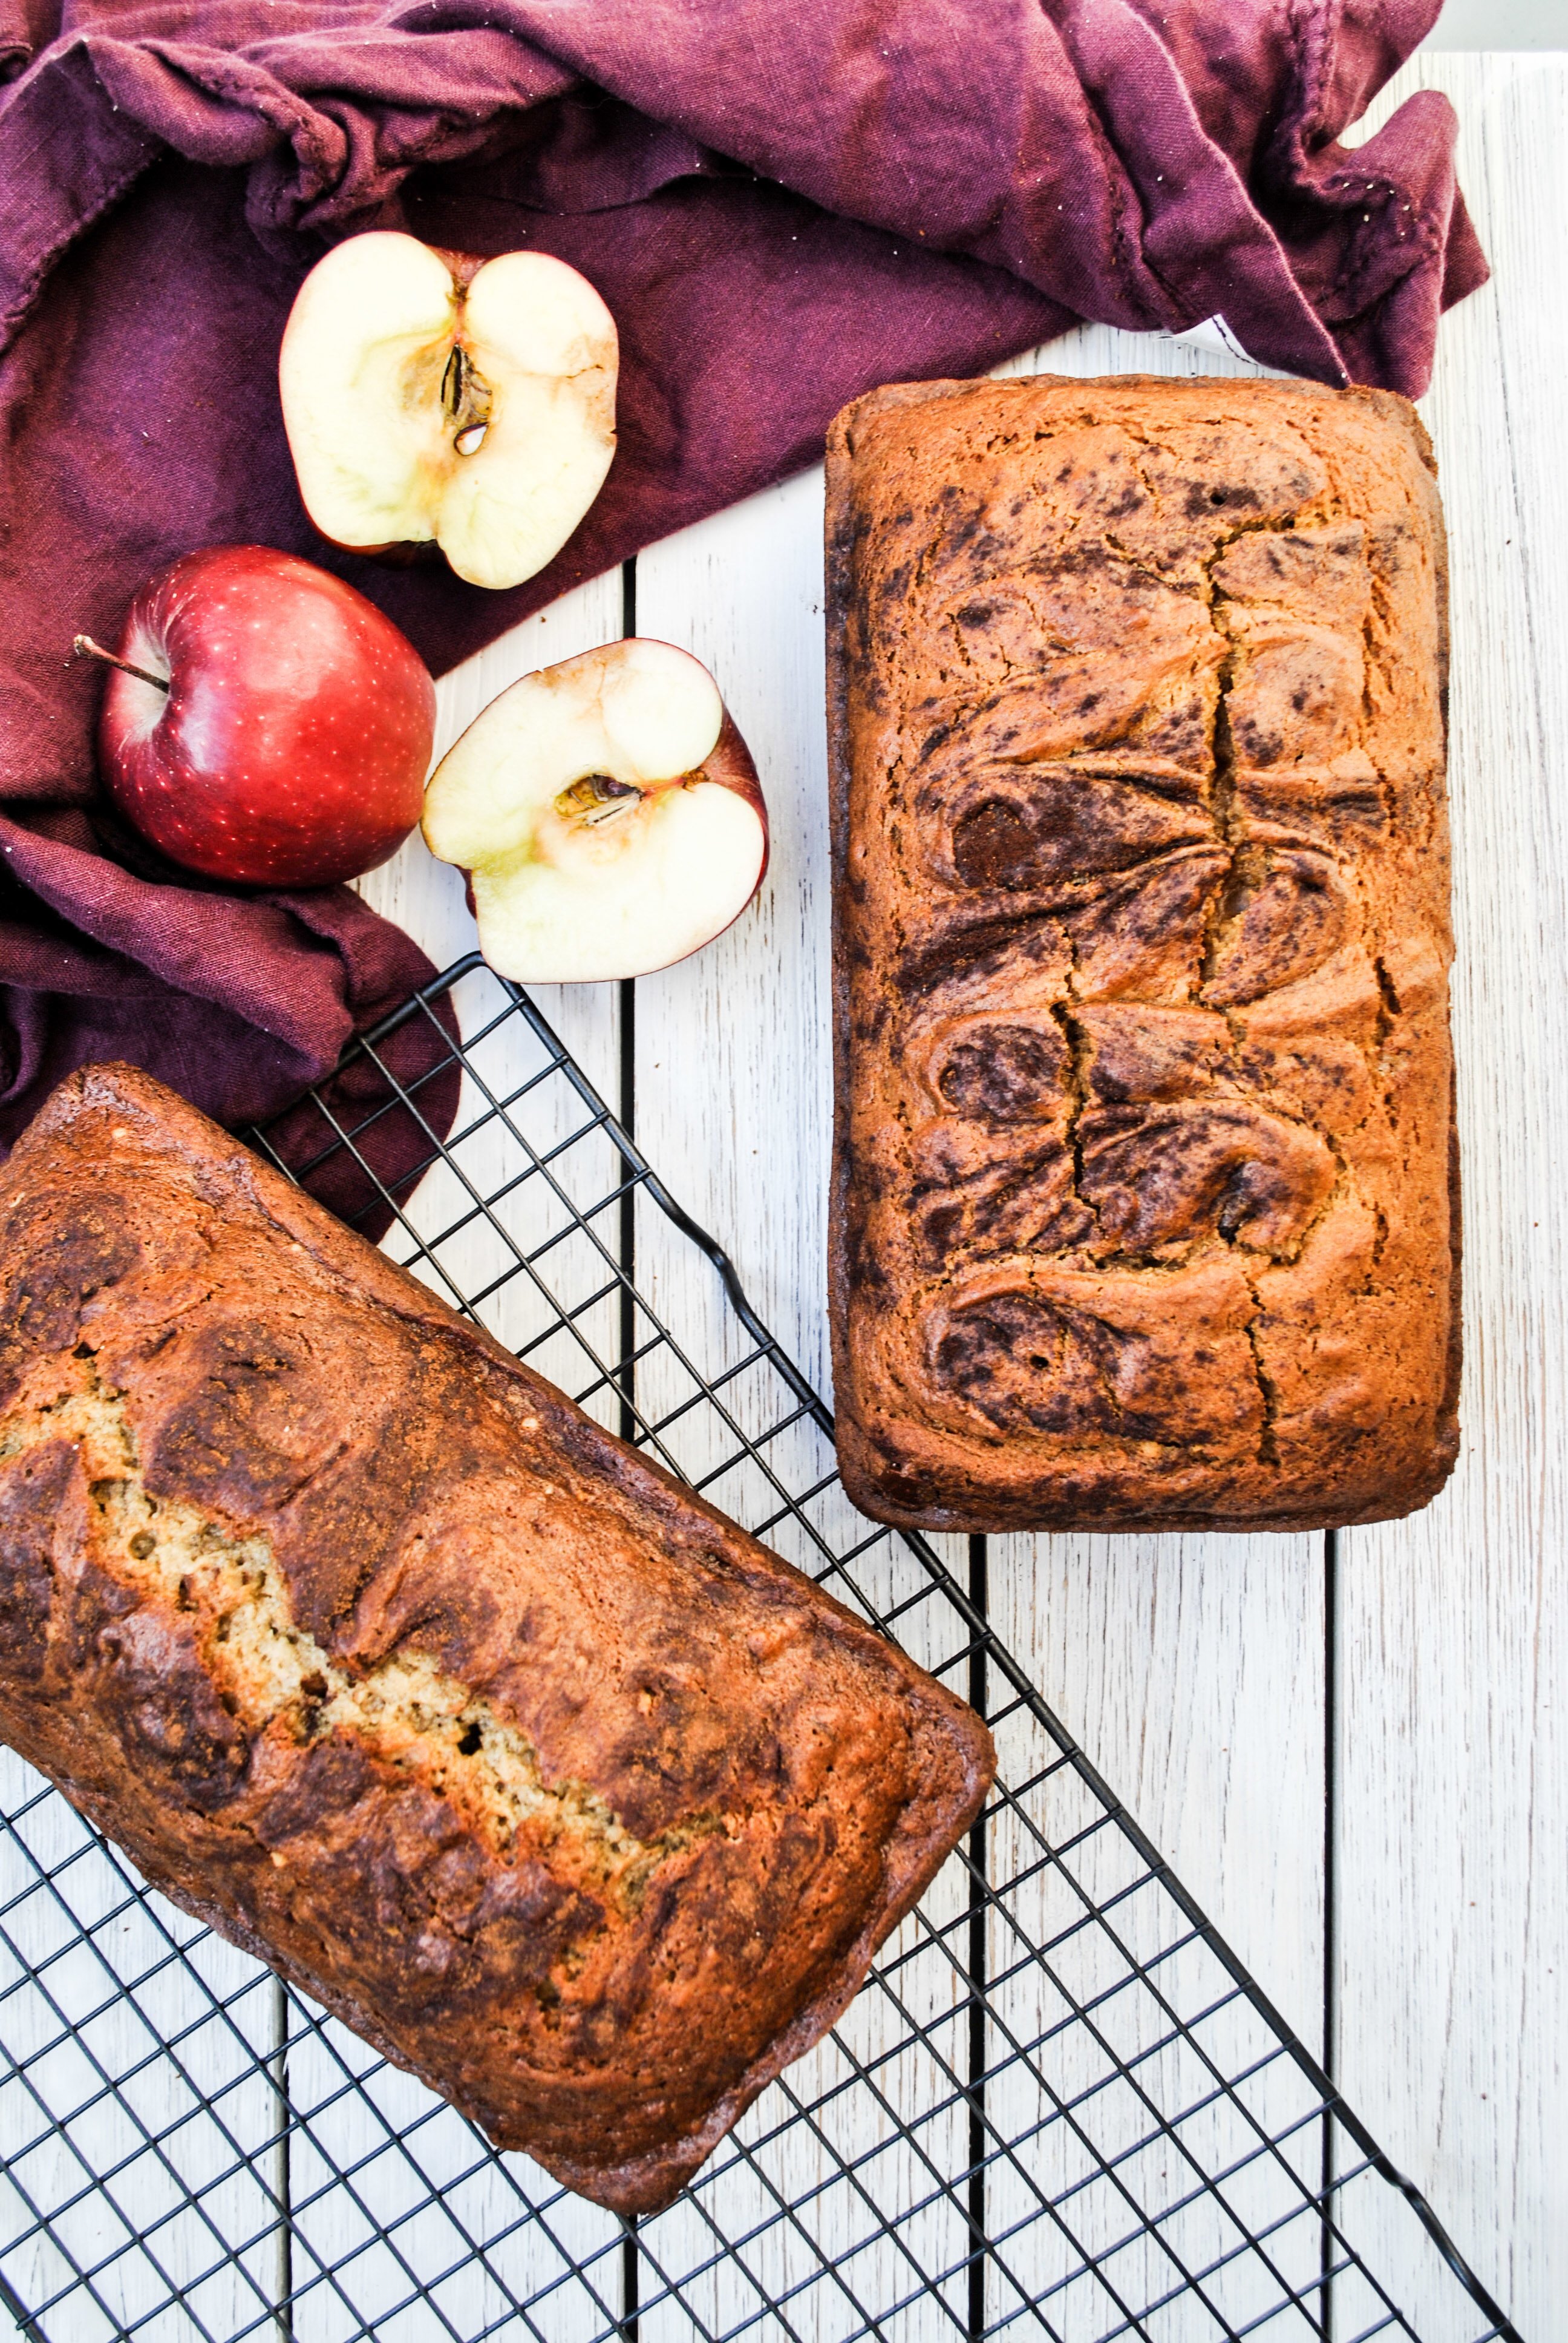 Lifestyle Blogger Chocolate and Lace shares her recipe for Pumpkin Swirl Bread.